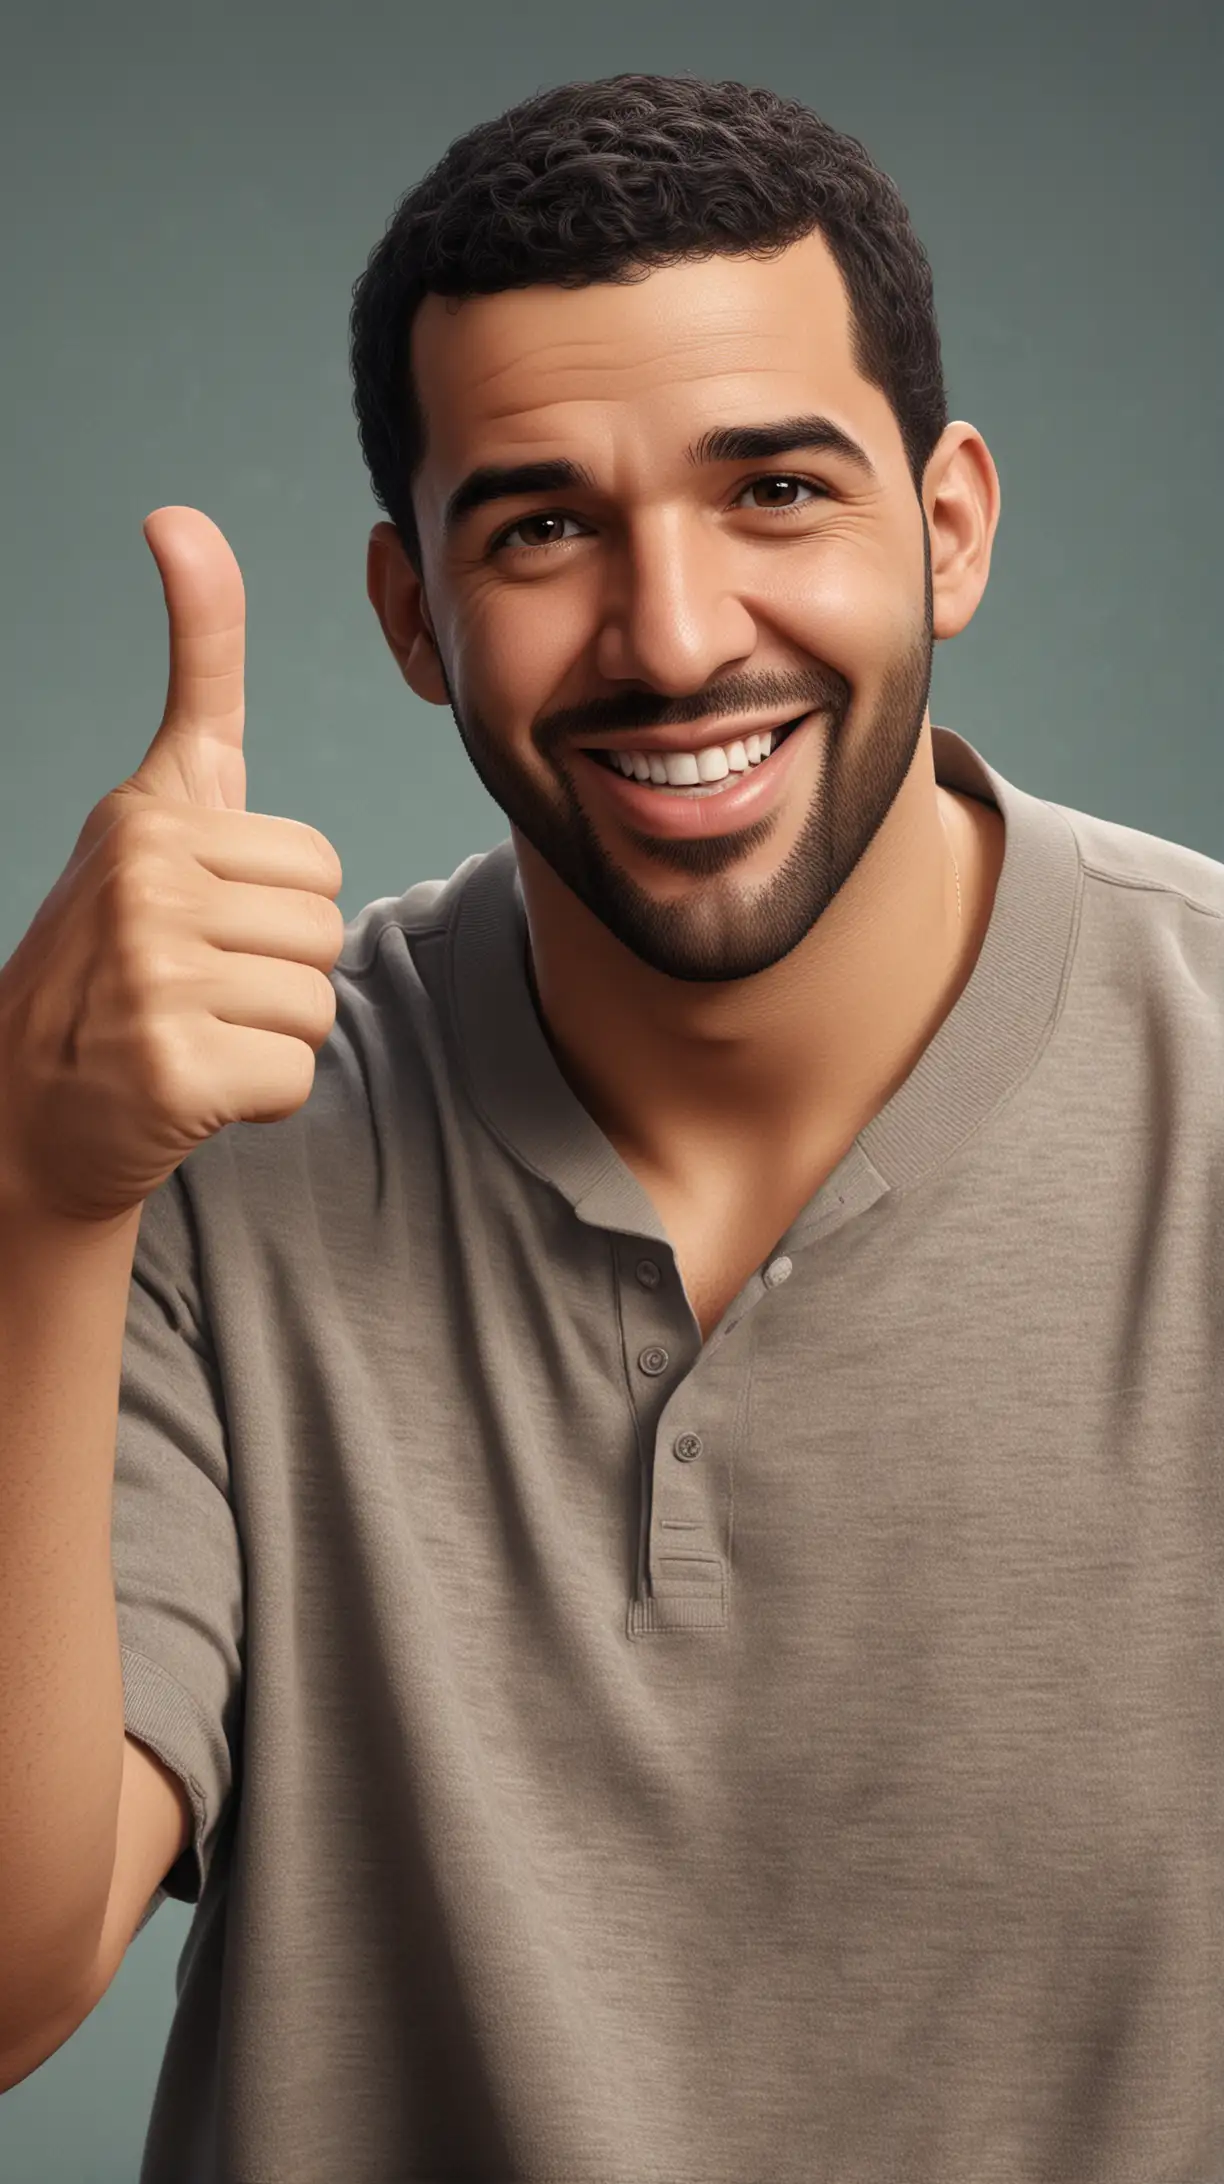 Drake Smirking and Giving Thumbs Up to Camera